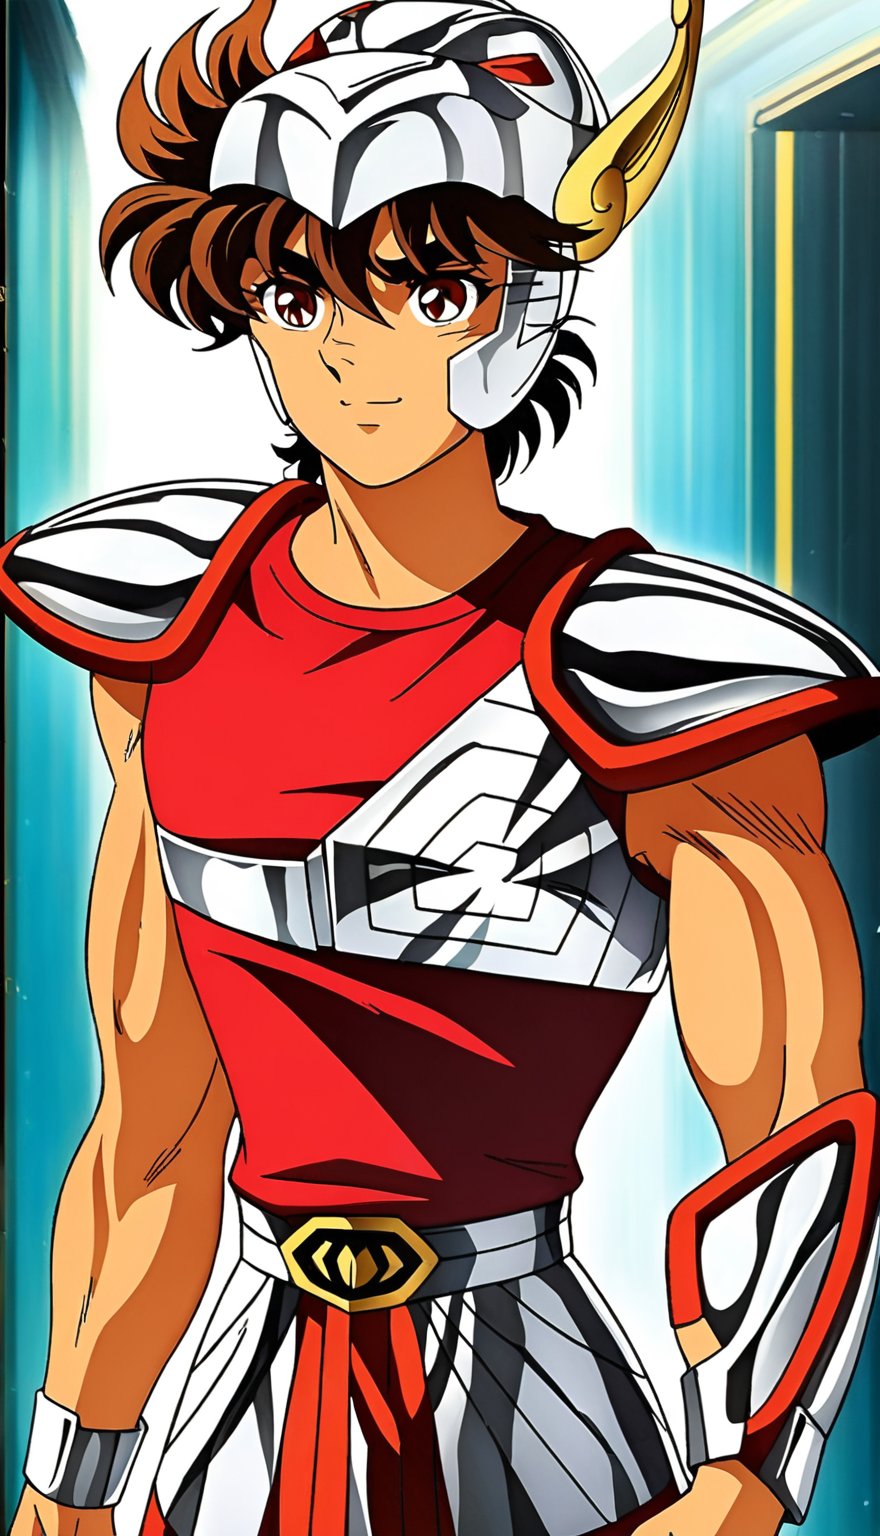 1boy, Seiya Pegasus, solo, face, smile, closed mouth, male focus, portrait, perfect, perfect brown hair, perfect brown eyes, perfect brown eyebrows, anime, perfect lines, perfect color, details, Design by Masami Kurumada, perfect hands, armor, helmet, shoulder pads, belt, red shirt, temple_of_athena_greece_background



Full length view, Perfect Anatomy, Perfect proportions, Strong brightness on the face, Facial details, intricate details, vibrant colors, perfect feet, highly detailed skin, textured skin, defined body features, detailed shadows, narrow waist, aesthetic,



PNG image format, sharp lines and borders, solid blocks of colors, over 300ppp dots per inch, 32k ultra high definition, 530MP, Fujifilm XT3, cinematographic, (anime:1.9), High definition RAW color professional photos, photo, masterpiece, ProRAW, high contrast, digital art trending on Artstation ultra high definition detailed, detailed, skin texture, hyper detailed, facial features, armature, best quality, ultra high res, high resolution, detailed, raw photo, sharp re, lens rich colors hyper realistic lifelike texture dramatic lighting unrealengine trending, ultra sharp, pictorial technique, (sharpness, definition and photographic precision), (contrast, depth and harmonious light details), (features, proportions, colors and textures at their highest degree of realism), (blur background, clean and uncluttered visual aesthetics, sense of depth and dimension, professional and polished look of the image), work of beauty and complexity. perfectly symmetrical body. (aesthetic + beautiful + harmonic:1.5), (ultra detailed face, ultra detailed perfect eyes, ultra detailed mouth, ultra detailed body, ultra detailed perfect hands, ultra detailed clothes, ultra detailed background, ultra detailed scenery:1.5),

,Seiya Pegasus